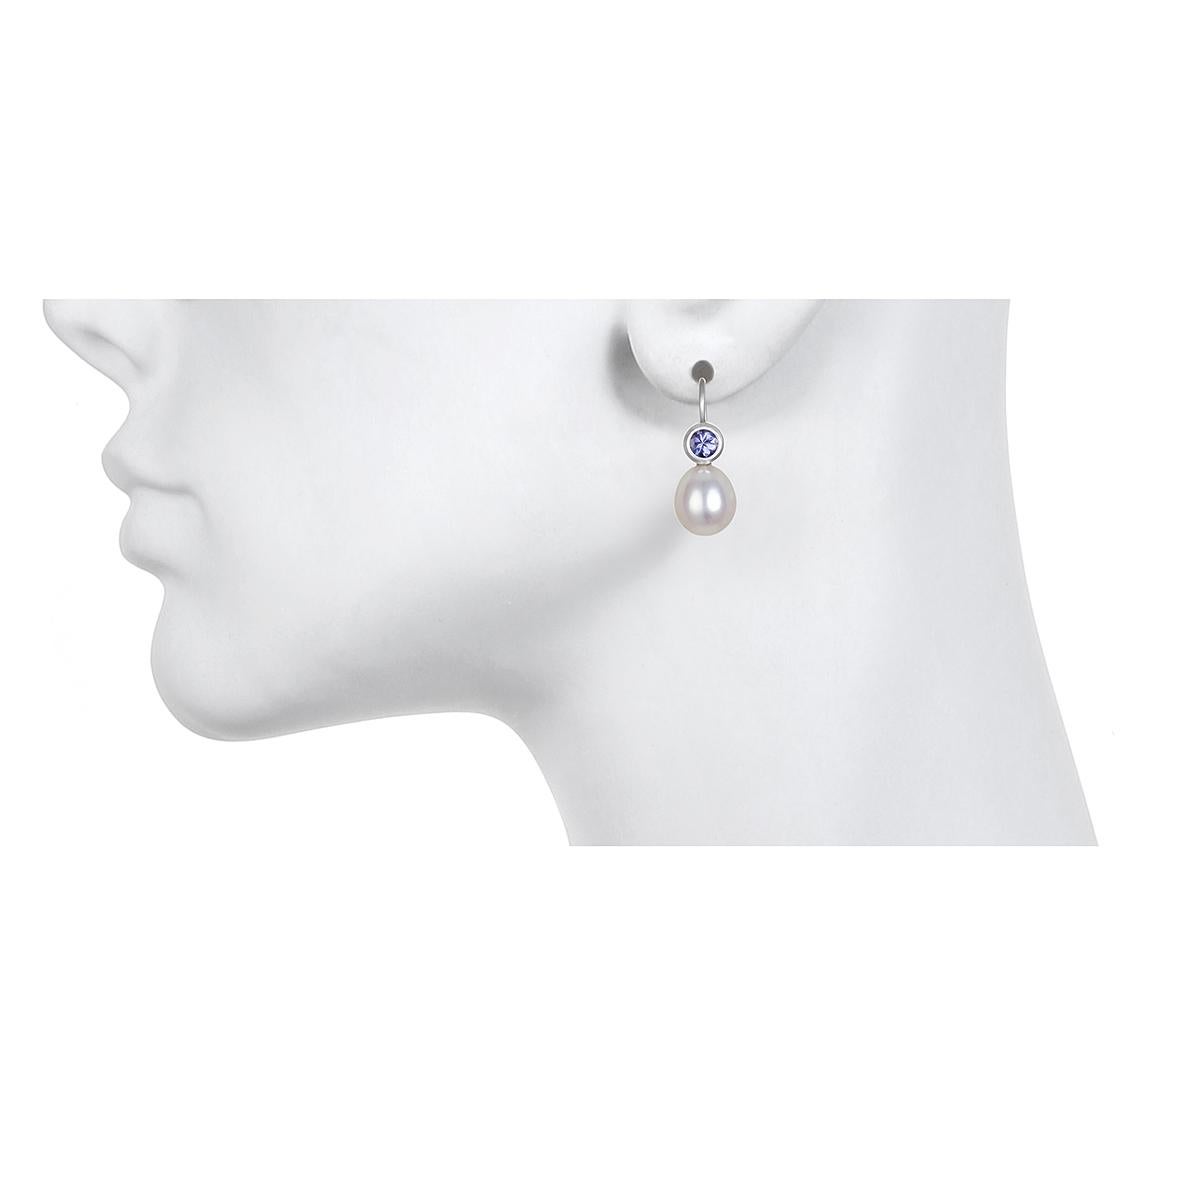 Set in 18k white gold,  tanzanite's brilliant range of purple and blue hues is further enhanced by lustrous white freshwater pearls to create a pair of modern-day classic drop earrings.  Matte-finished.
Casual or corporate, the clean design is